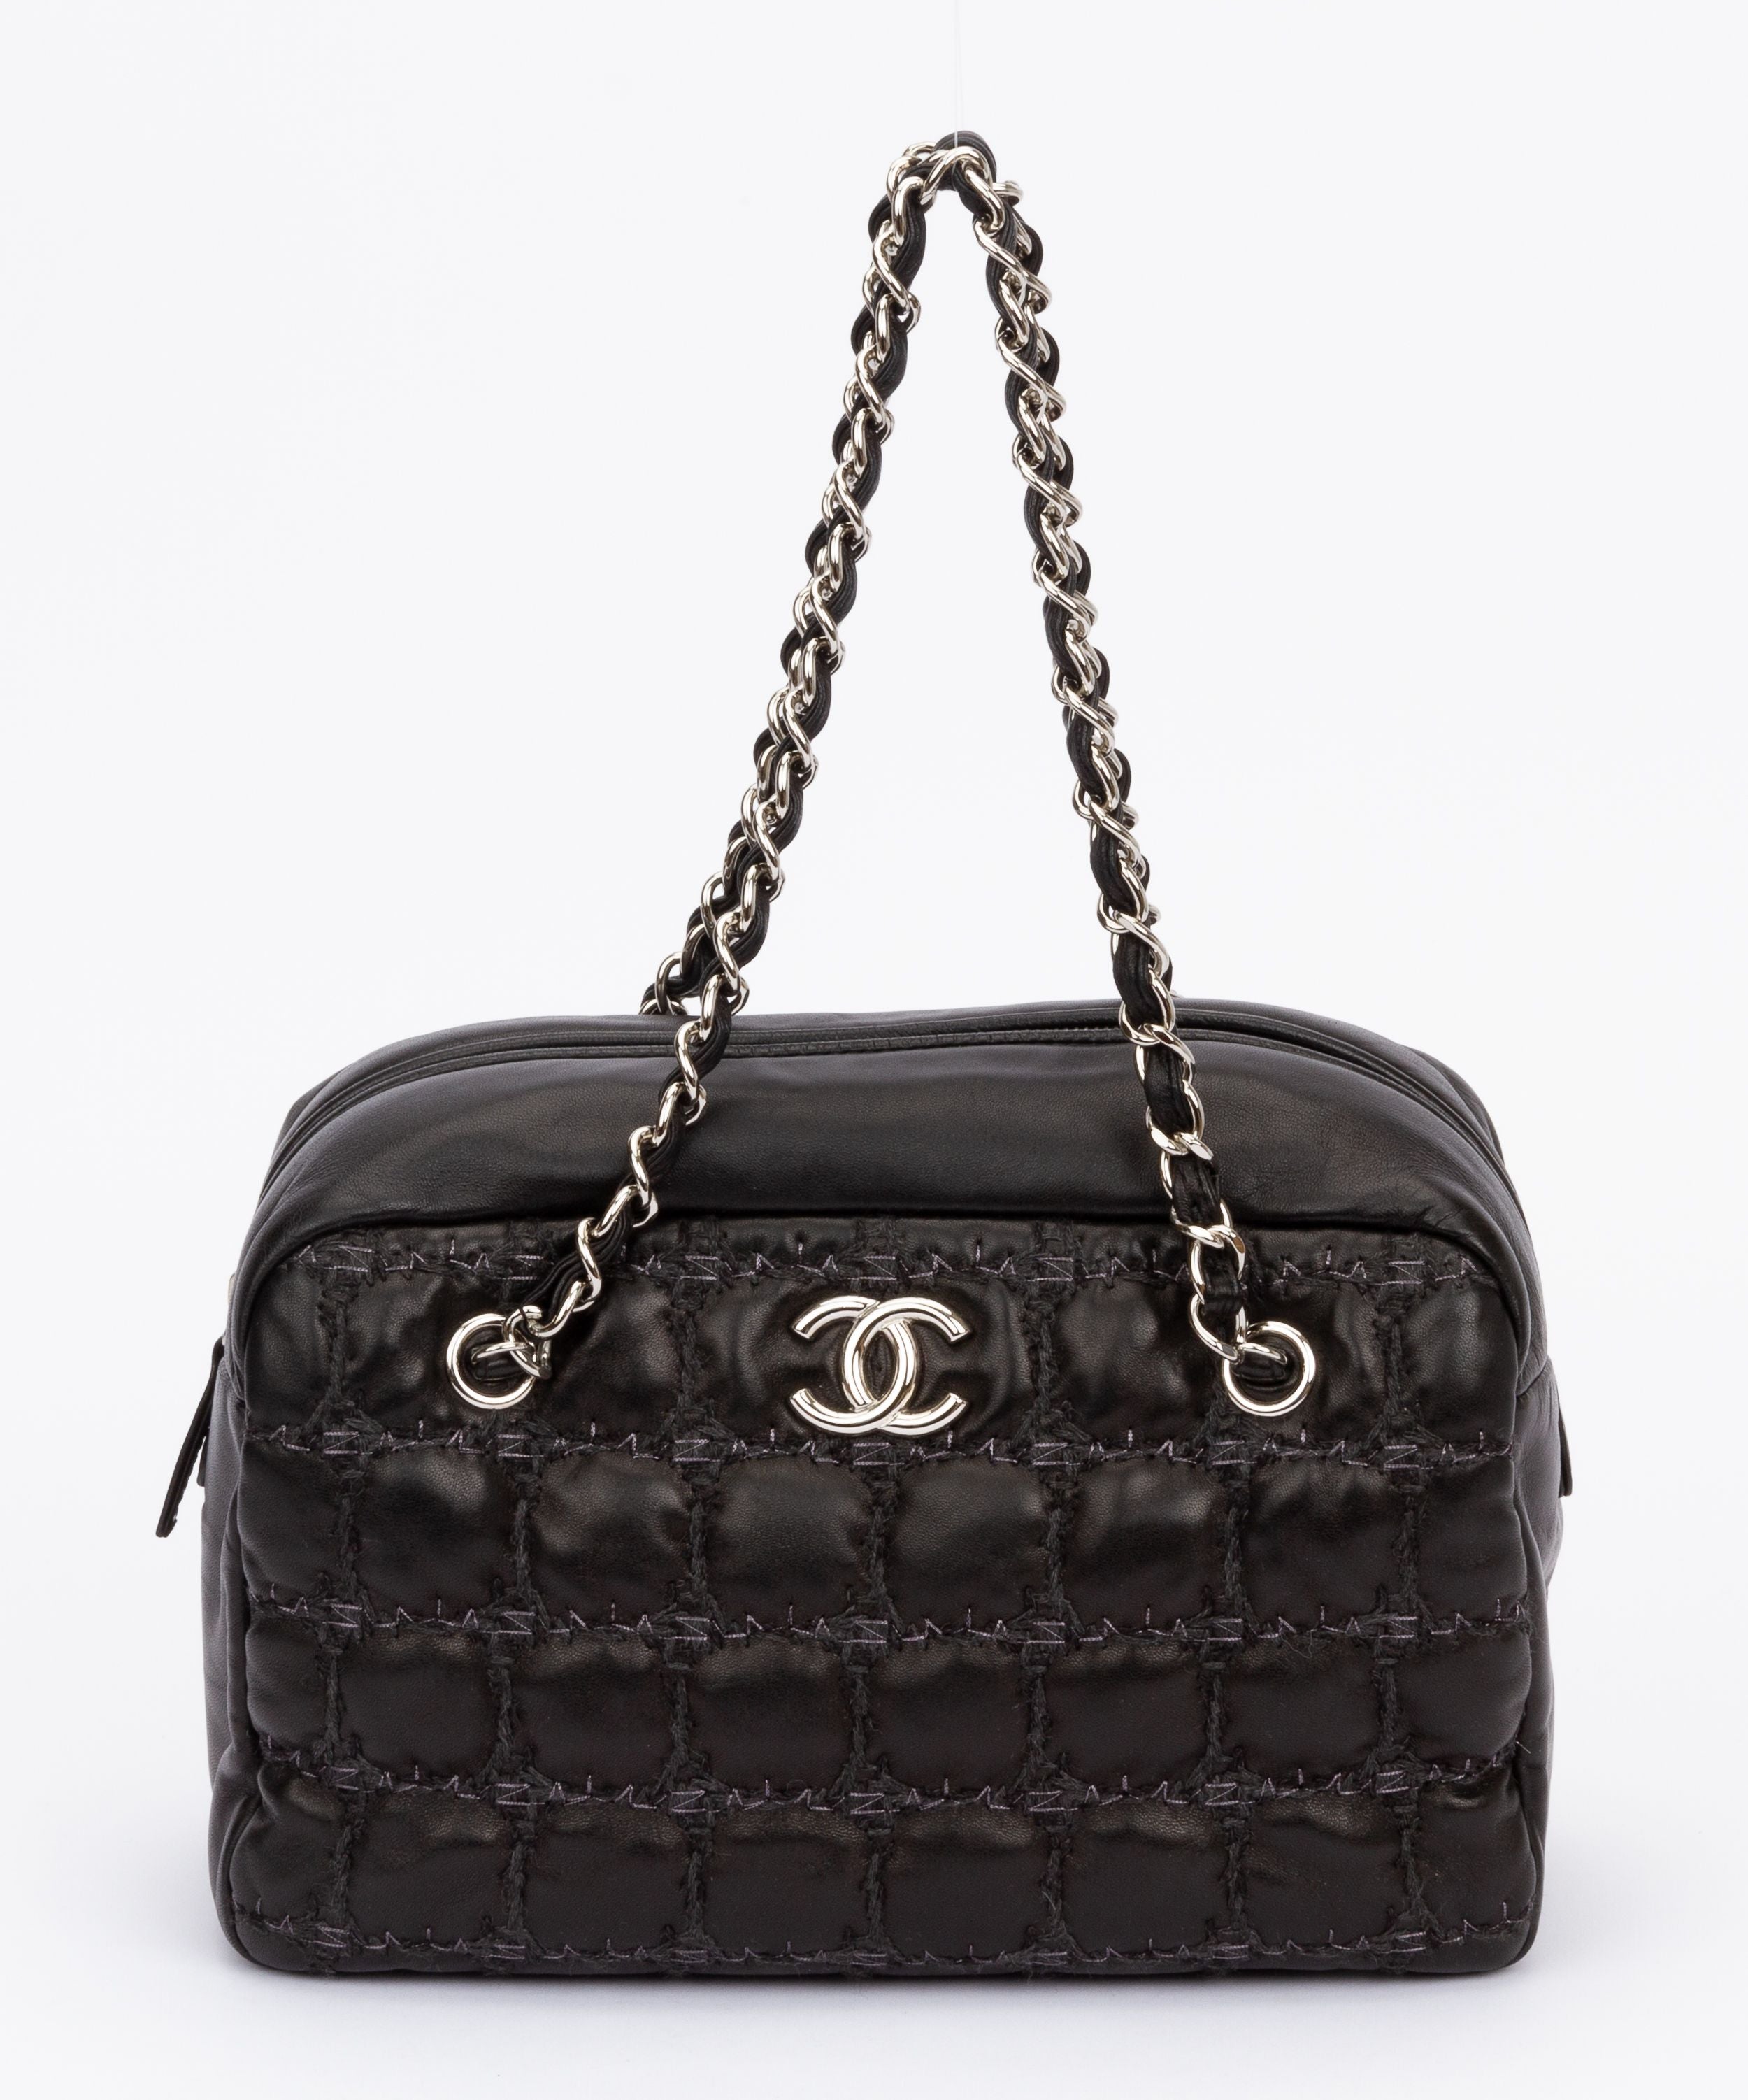 Sold at Auction: Chanel Beige Lambskin Chain Stitch Classic Flap Bag